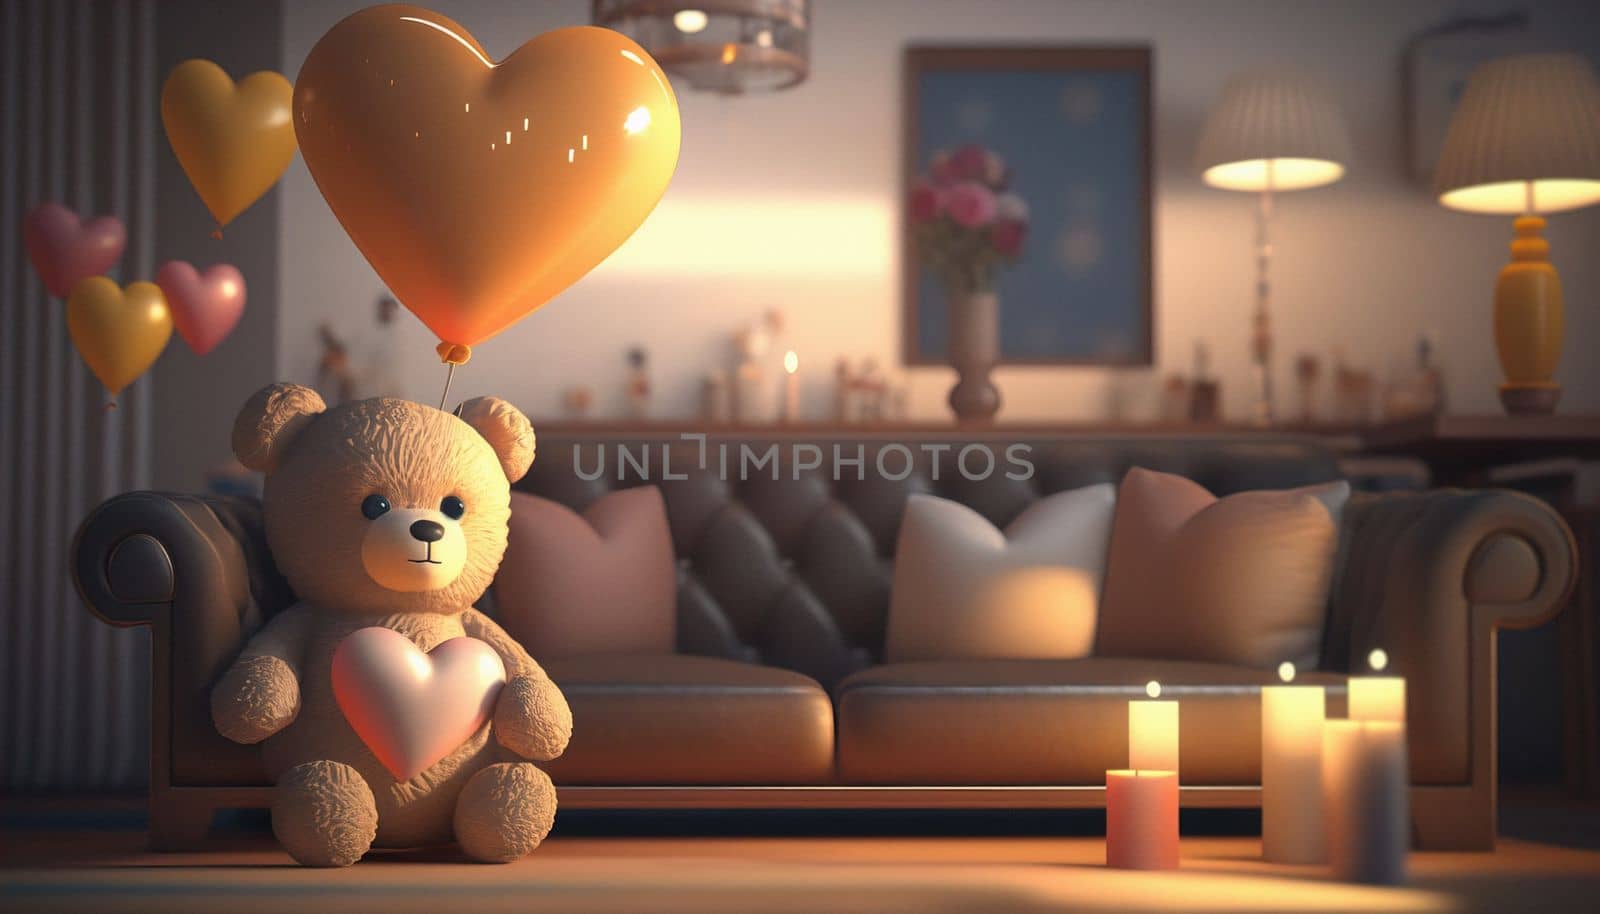 A photo of Teddy bear holding balloon heart sharp and candles, cozy living room background, 3D Rendering. Download image